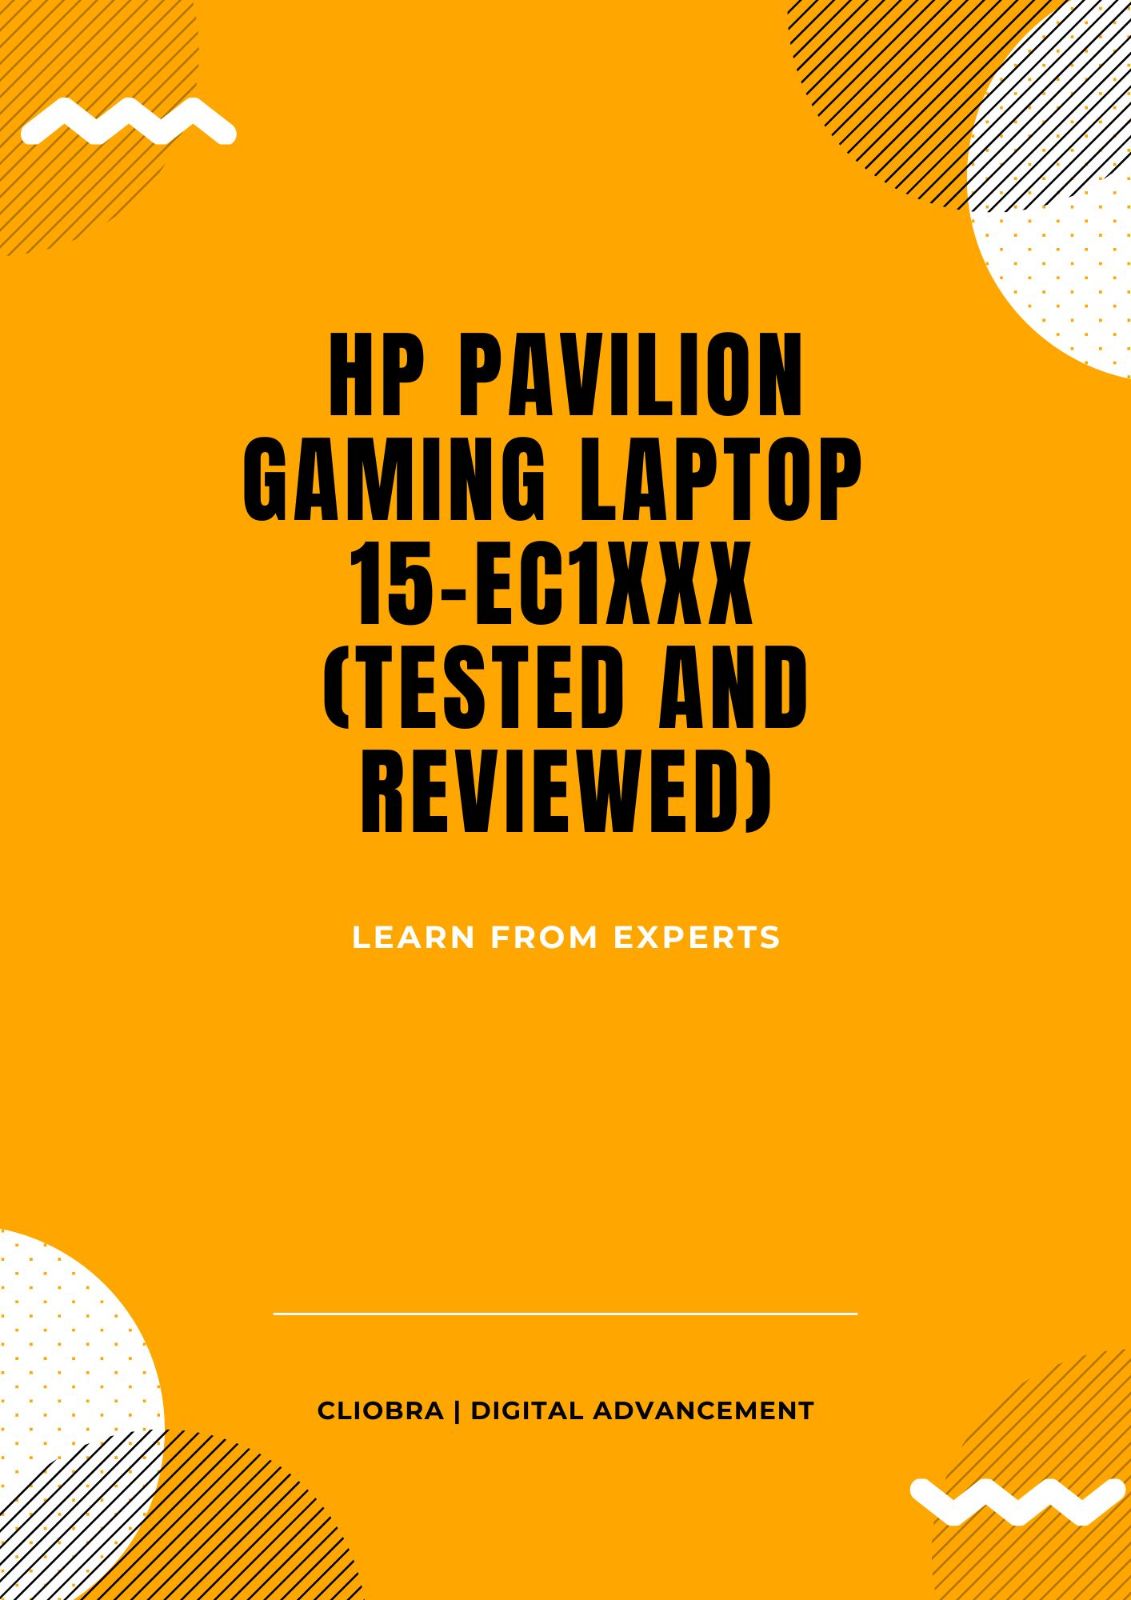 HP Pavilion Gaming Laptop 15-ec1xxx (Tested and Reviewed)